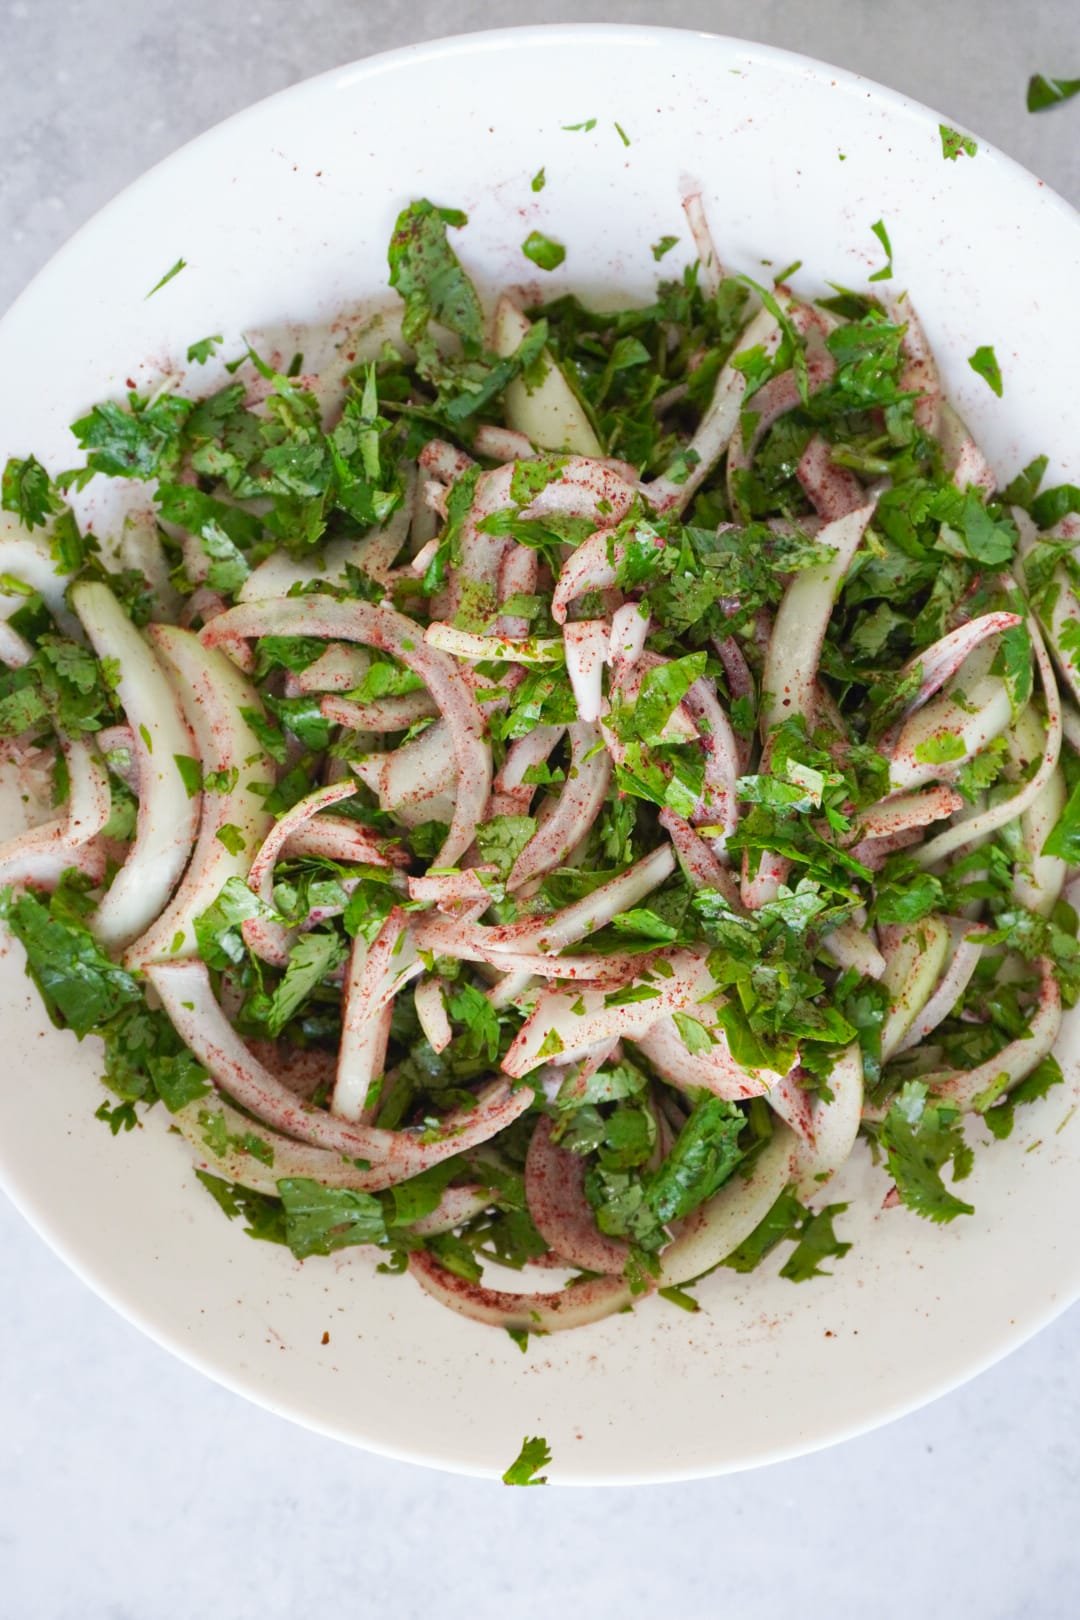 To prepare your salad is very simple.  Wash and chop a whole bunch of coriander.  Chop up 2 onions longways and sprinkle with the juice of 1 lemon and bit of sumac.